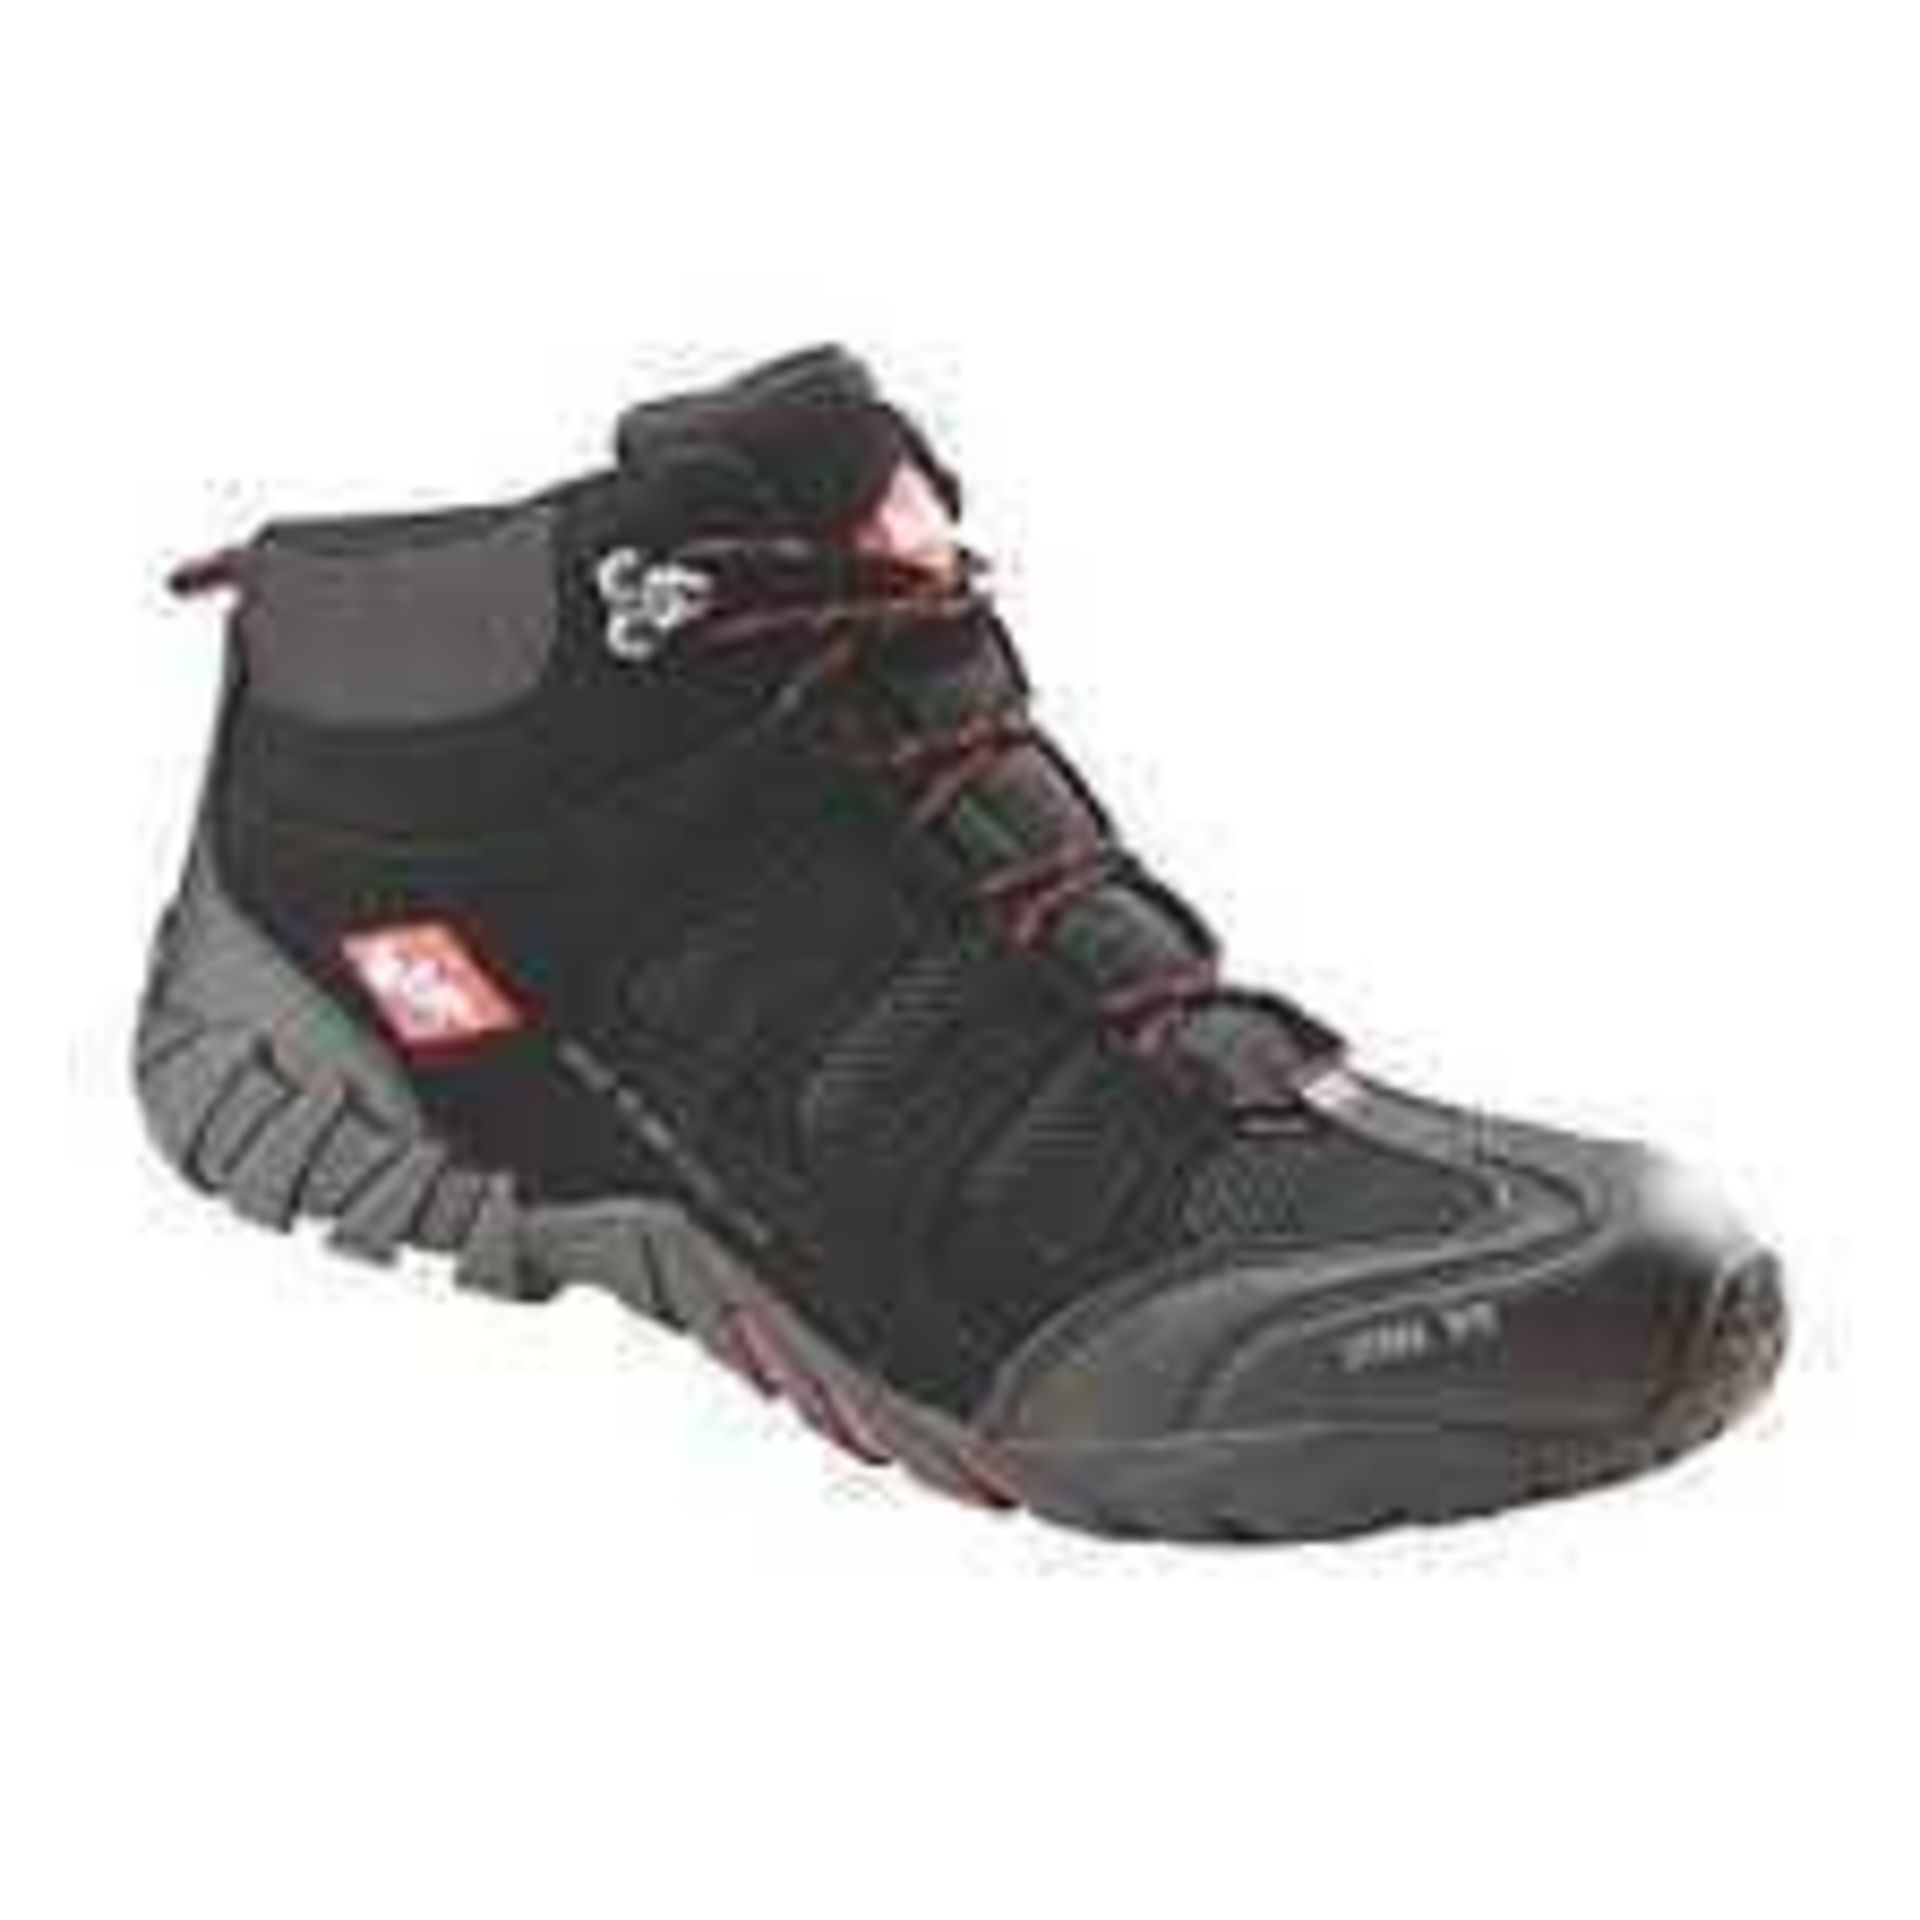 RRP £120 Lot To Contain 4 Boxed Pairs Of Lee Cooper Size 12 Workwear Safety Shoes